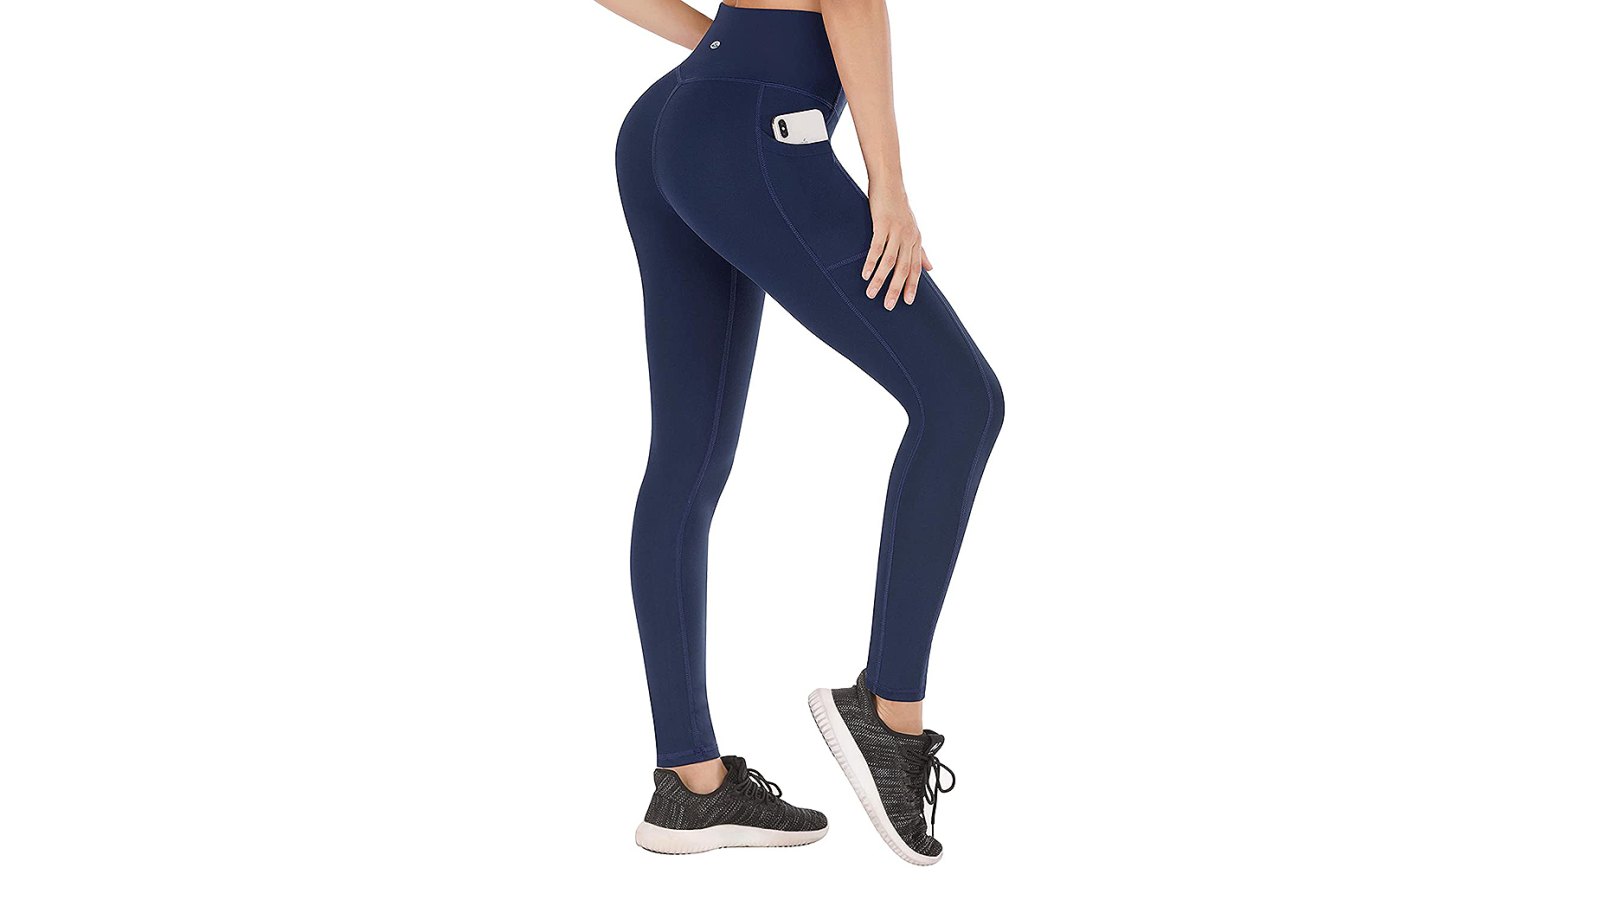 Buy Heathyoga Yoga Pants with Pockets for Women Leggings with